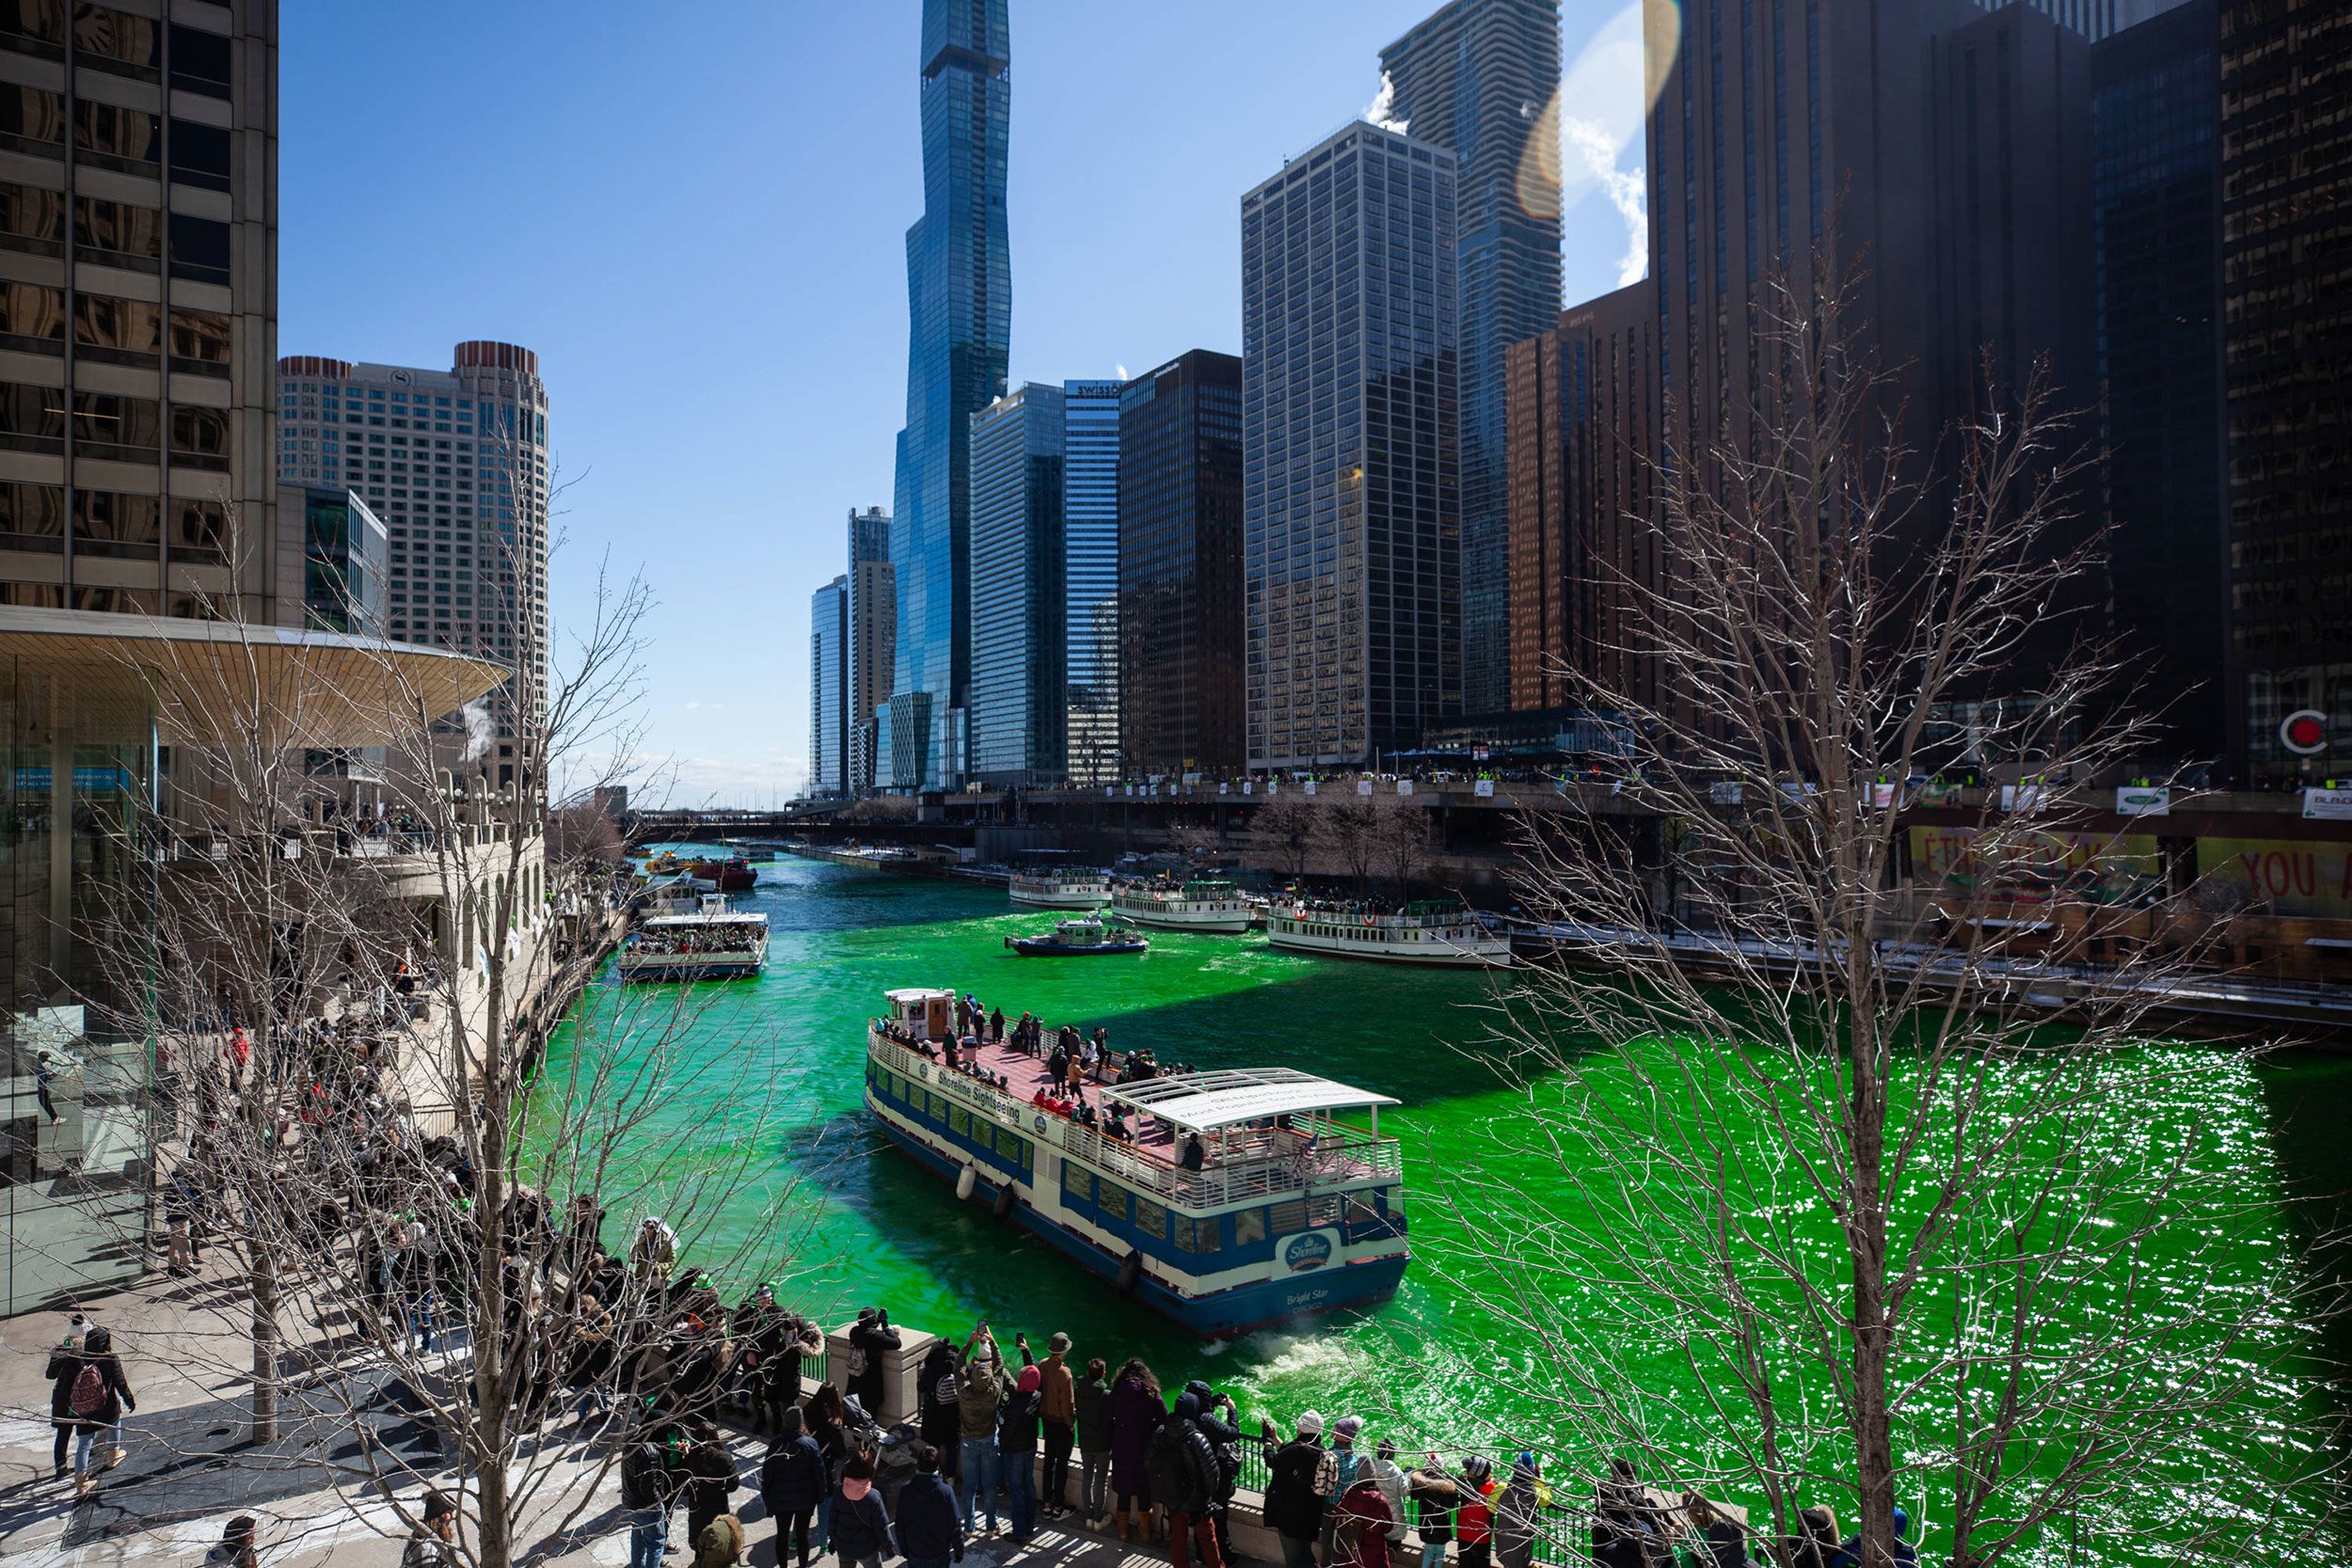 THE HISTORY OF CHICAGO & THE GREEN RIVER